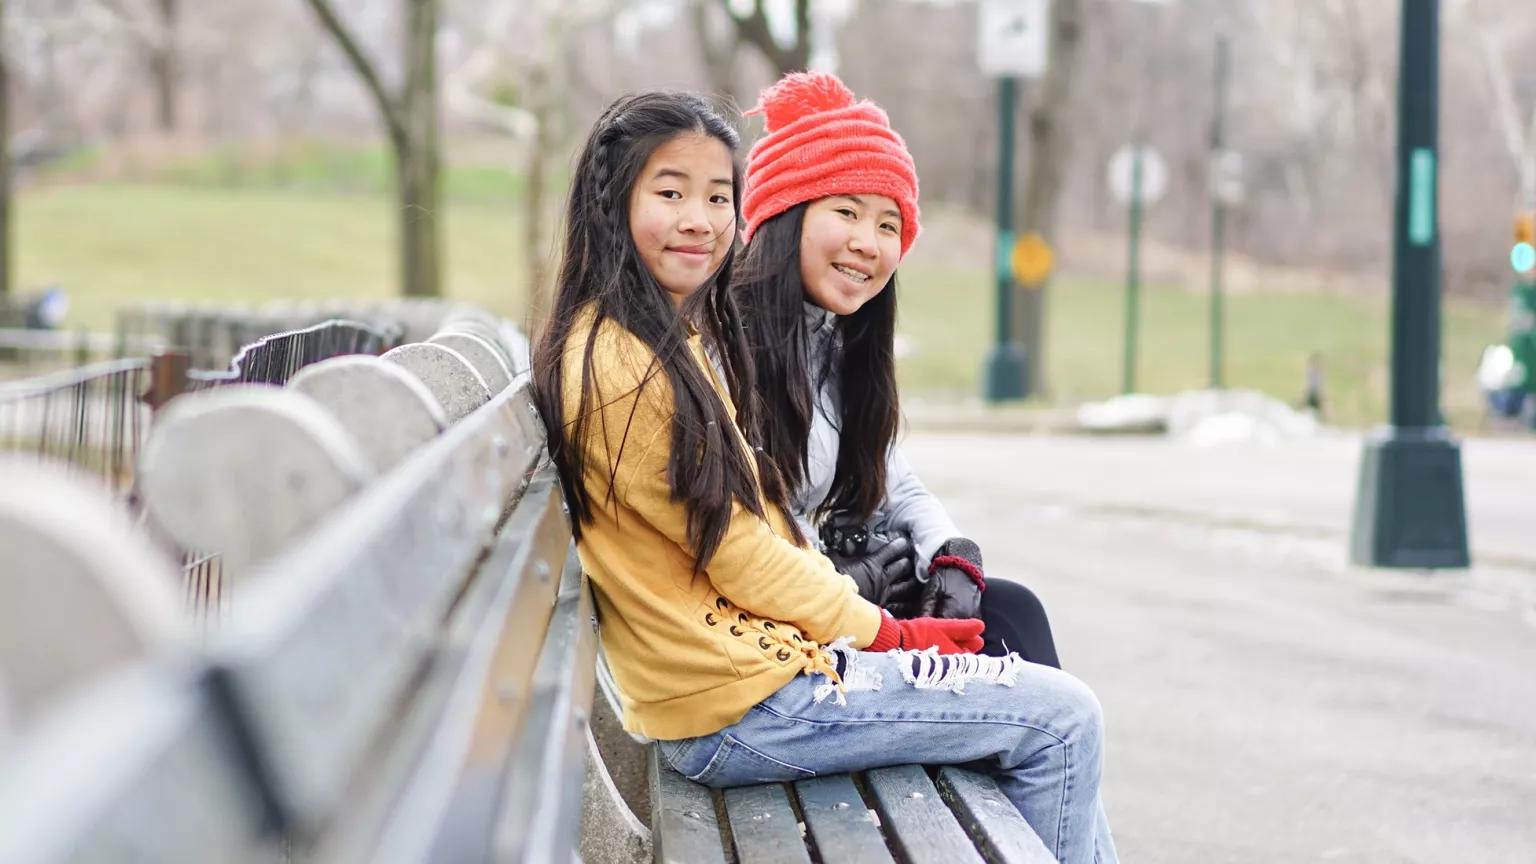 Two girls sitting on a bench in a city park